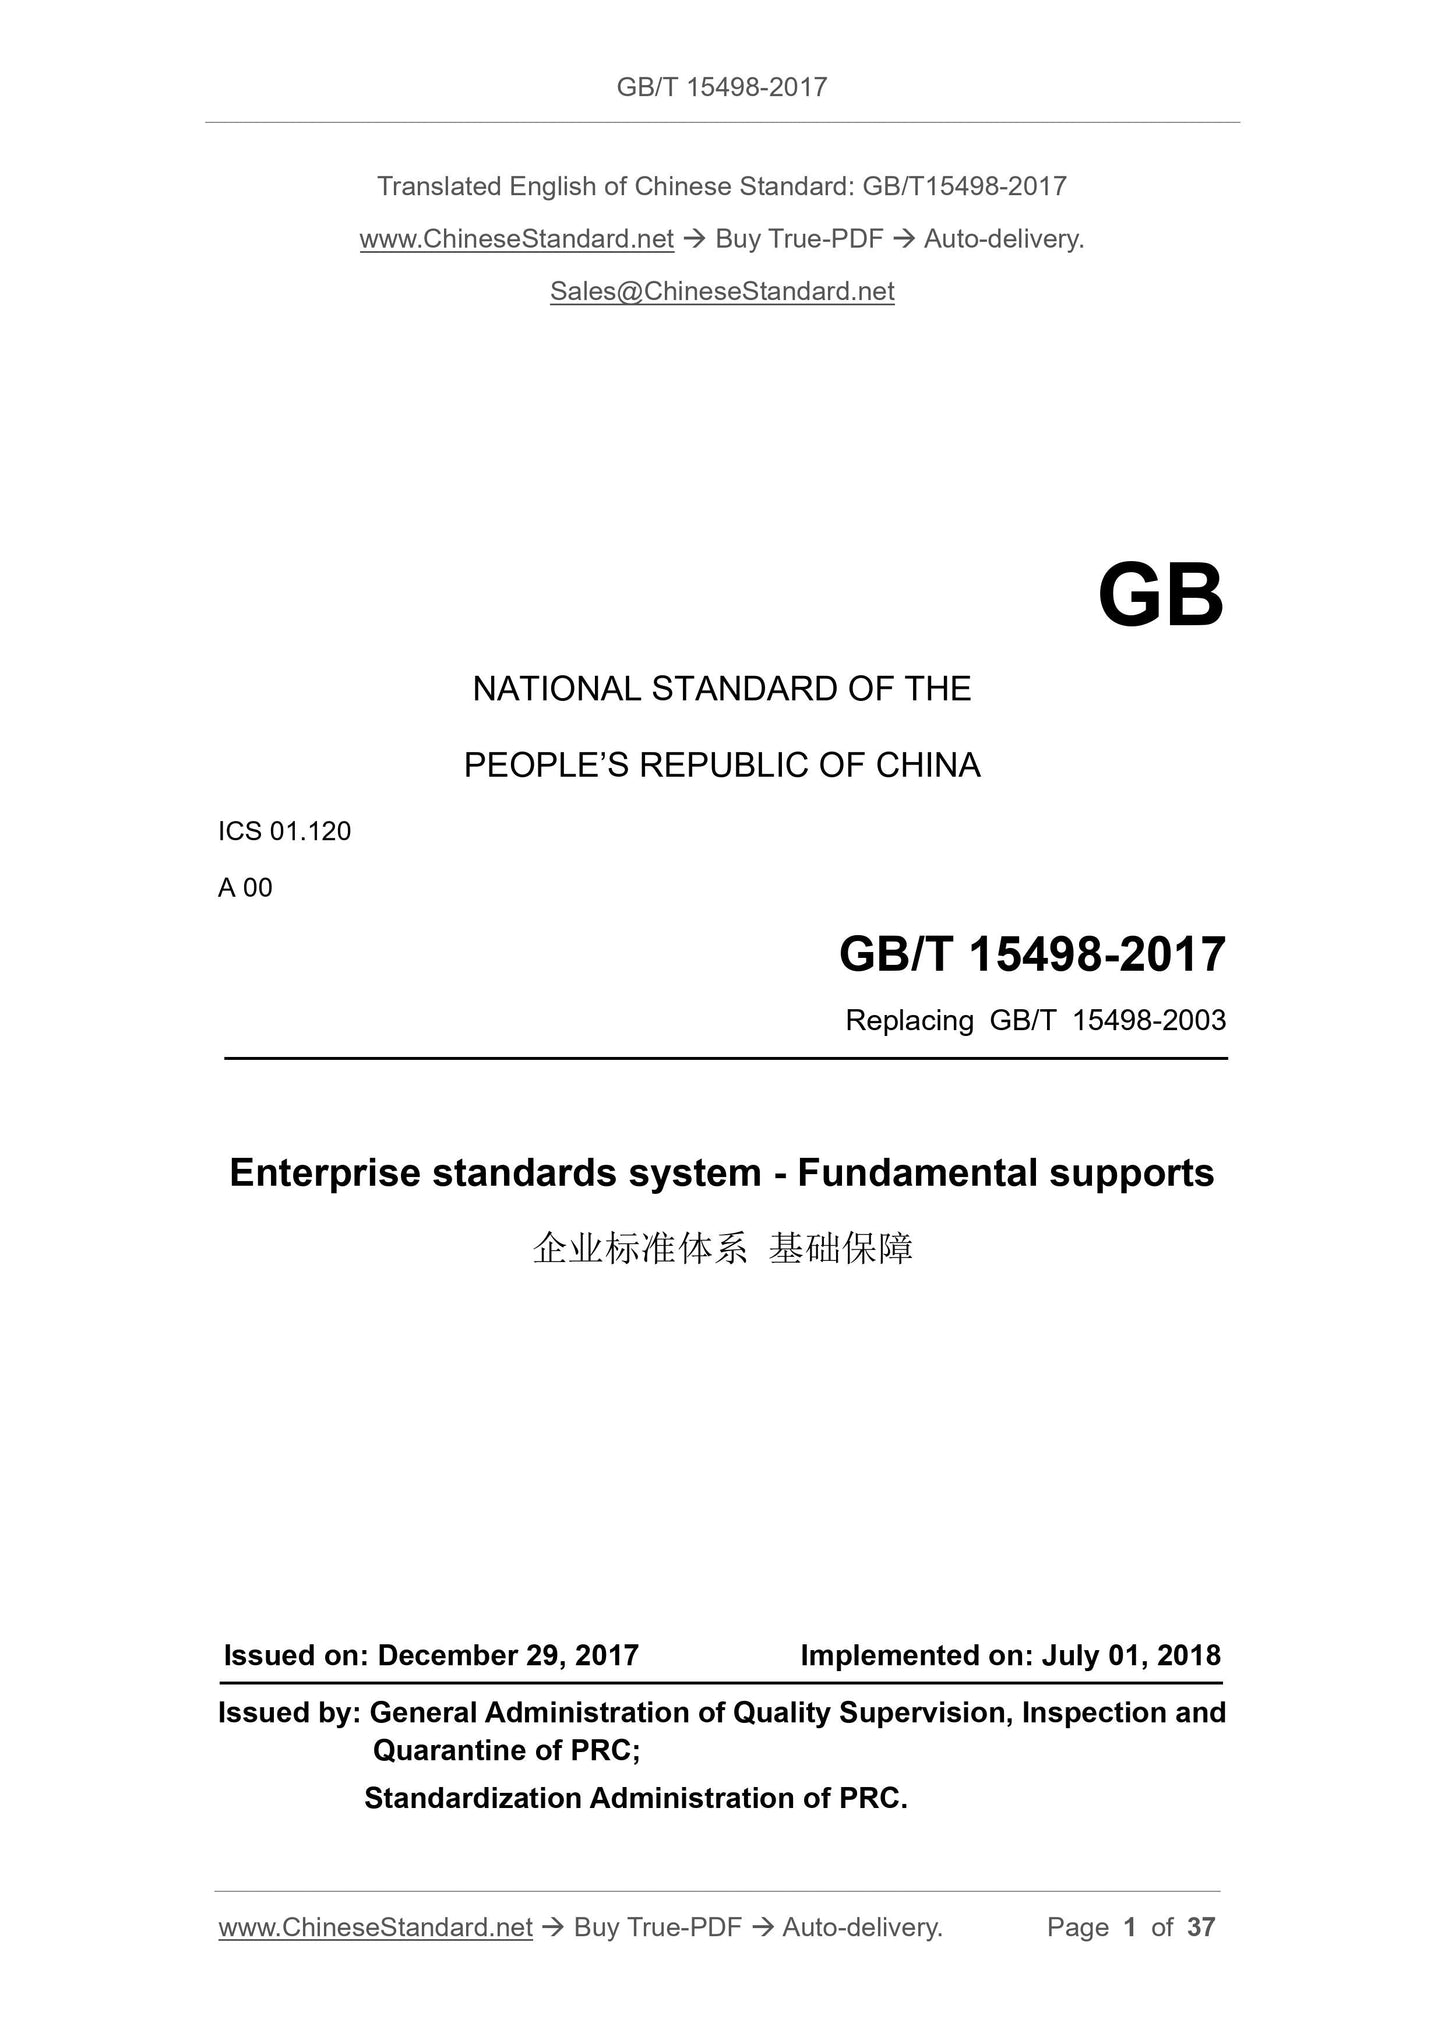 GB/T 15498-2017 Page 1